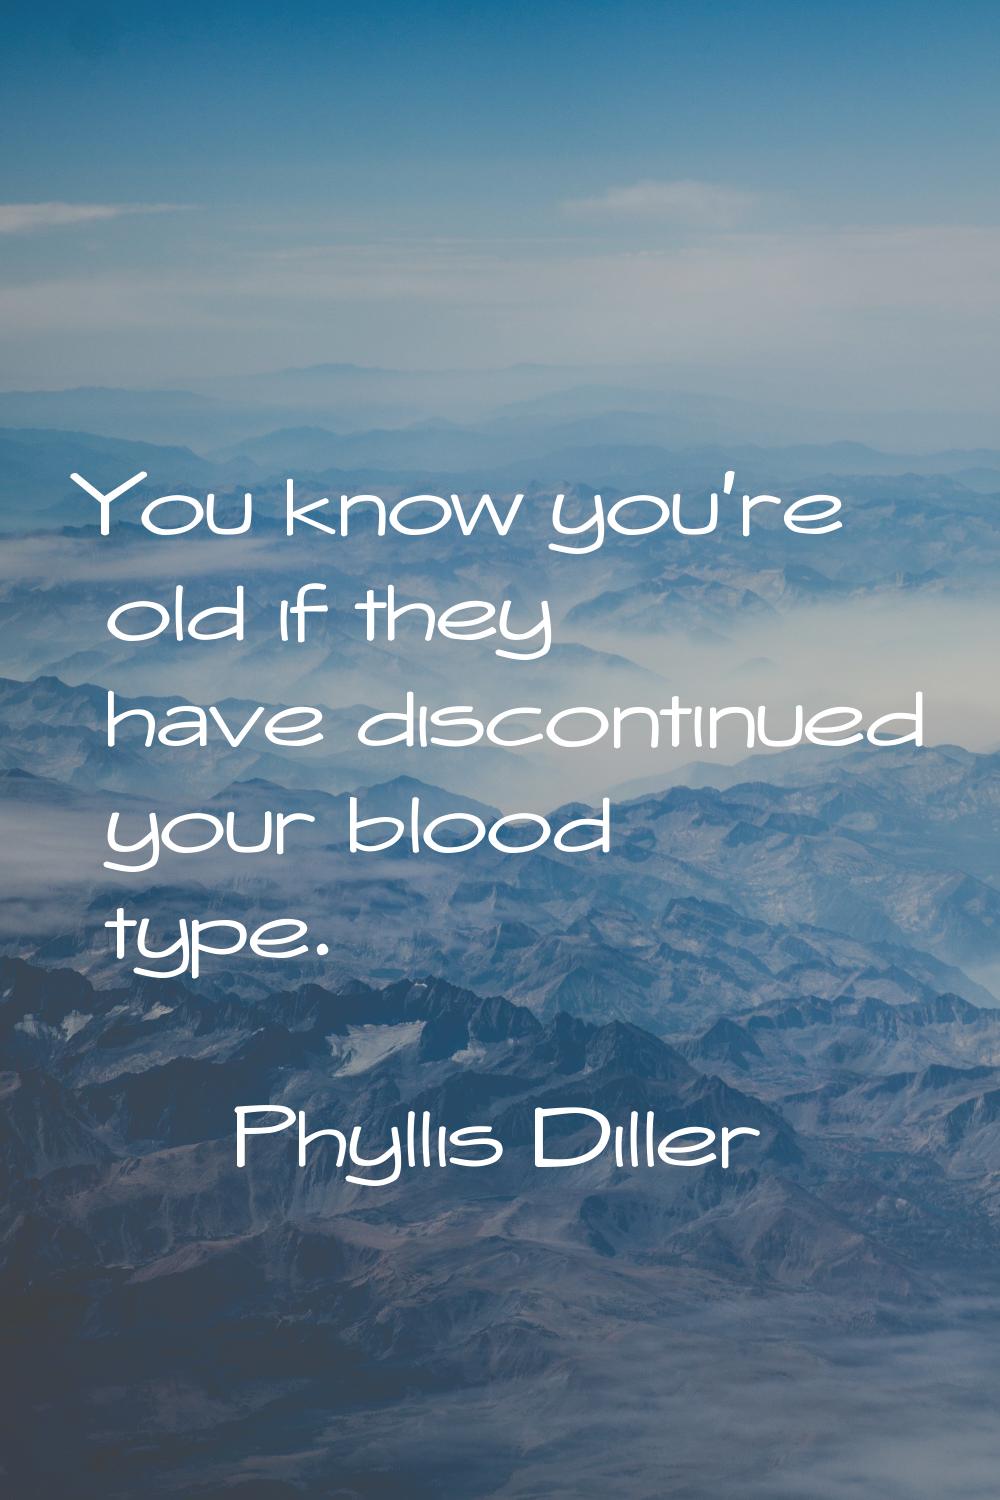 You know you're old if they have discontinued your blood type.